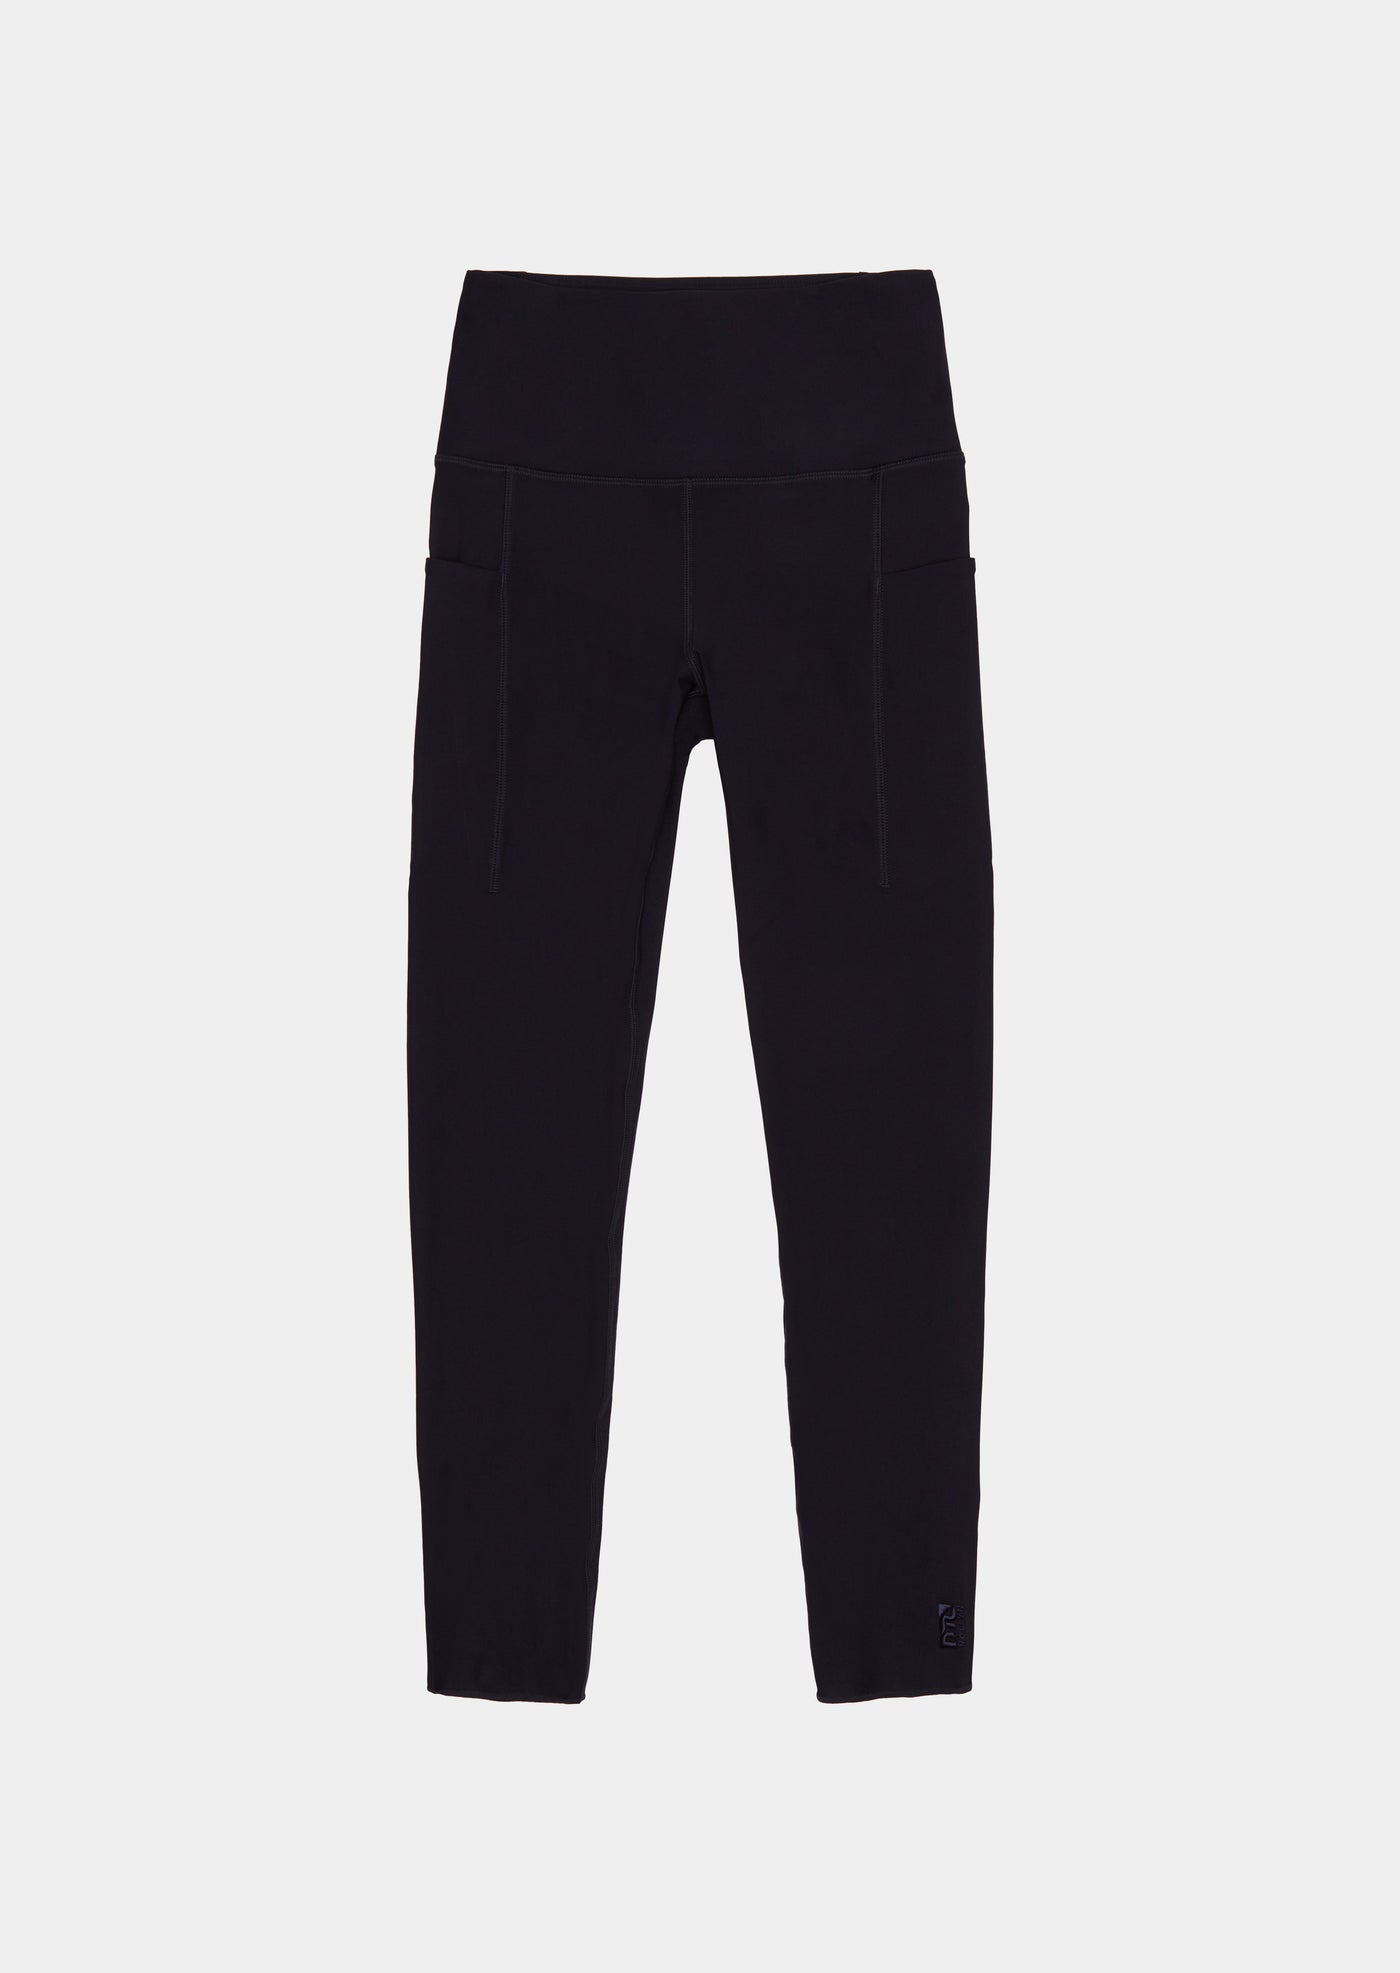 PE Nation Initialise High-Waisted Leggings  Anthropologie Japan - Women's  Clothing, Accessories & Home